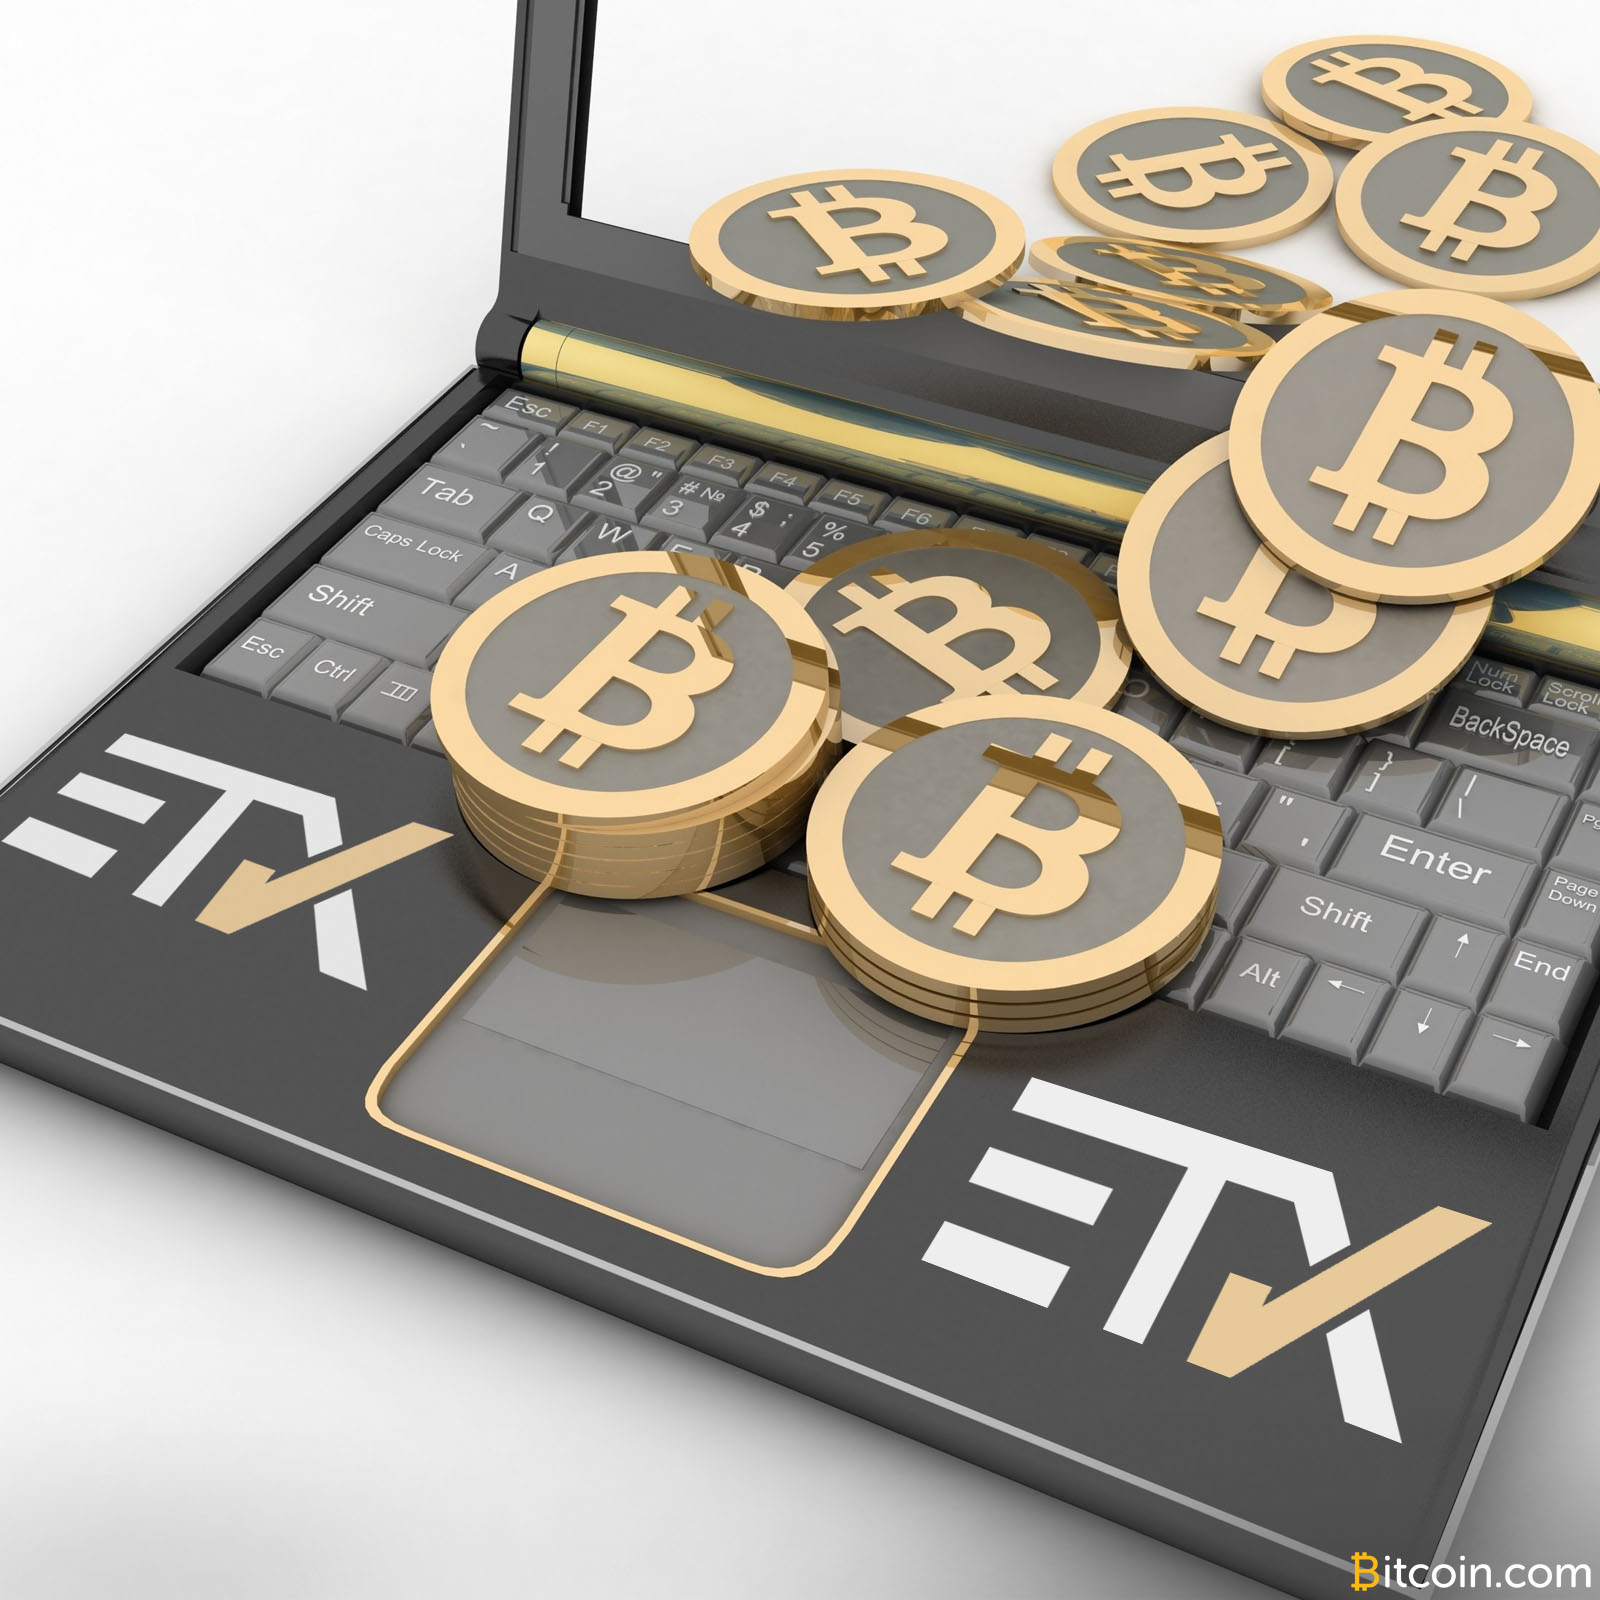 ETX Capital Deploys Bitcoin CFD Trading for Clients